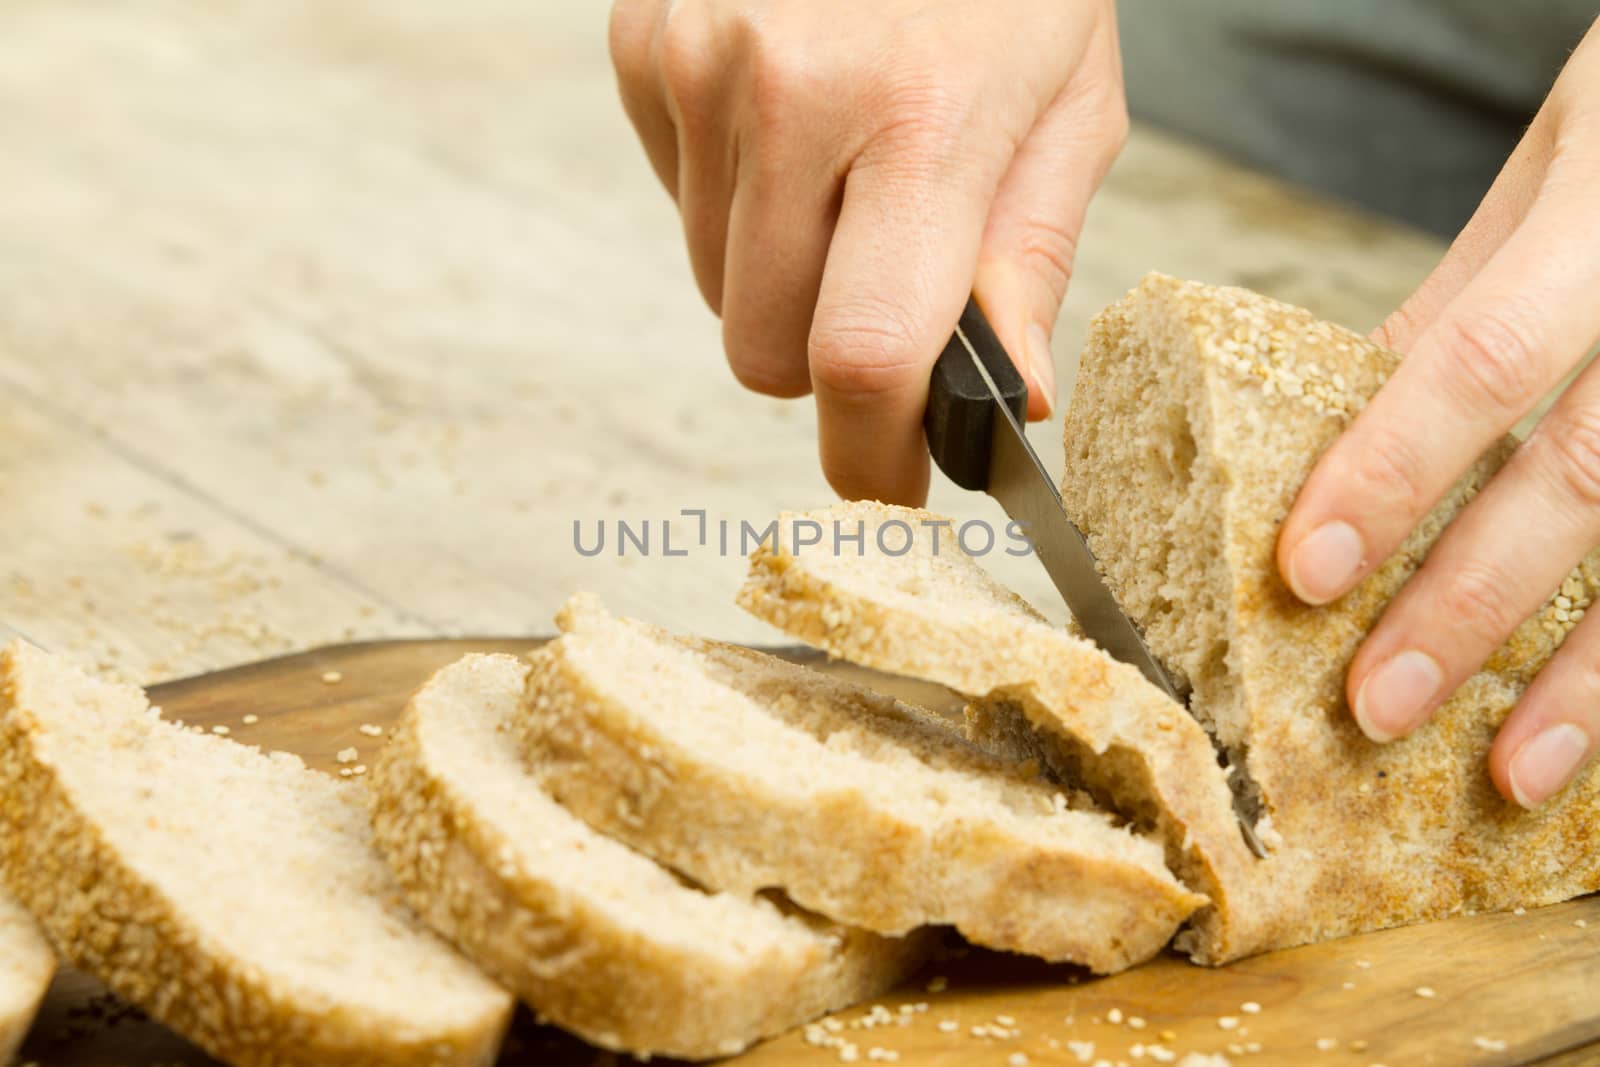 Close up of woman hands slicing a loaf of homemade bread with se